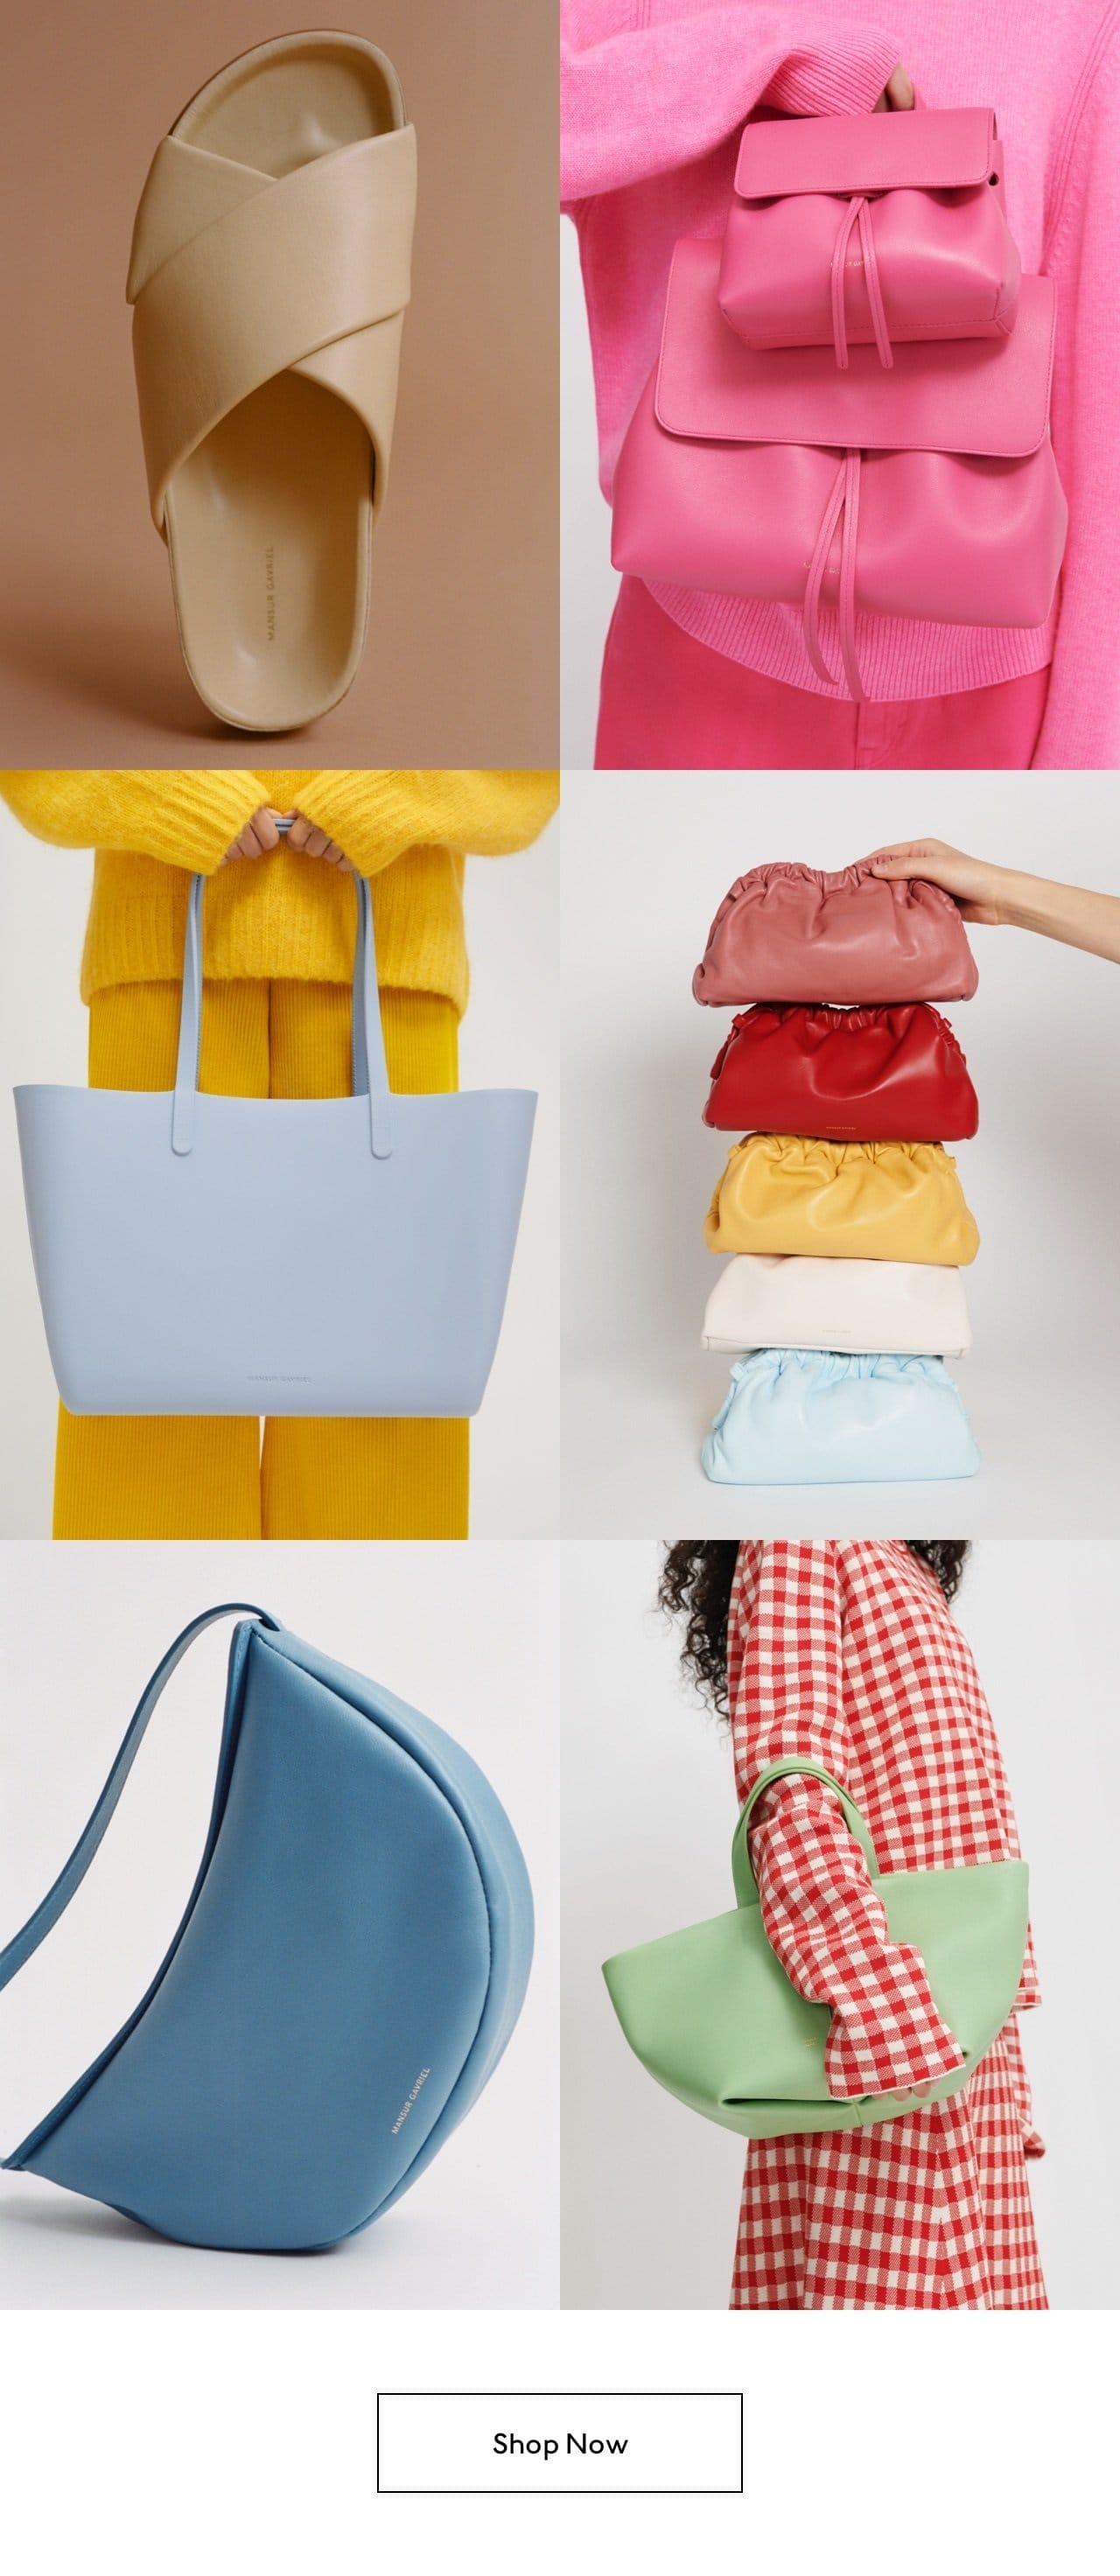 Discover new shapes, colors and materials coming soon to mansurgavriel.com. Shop now.